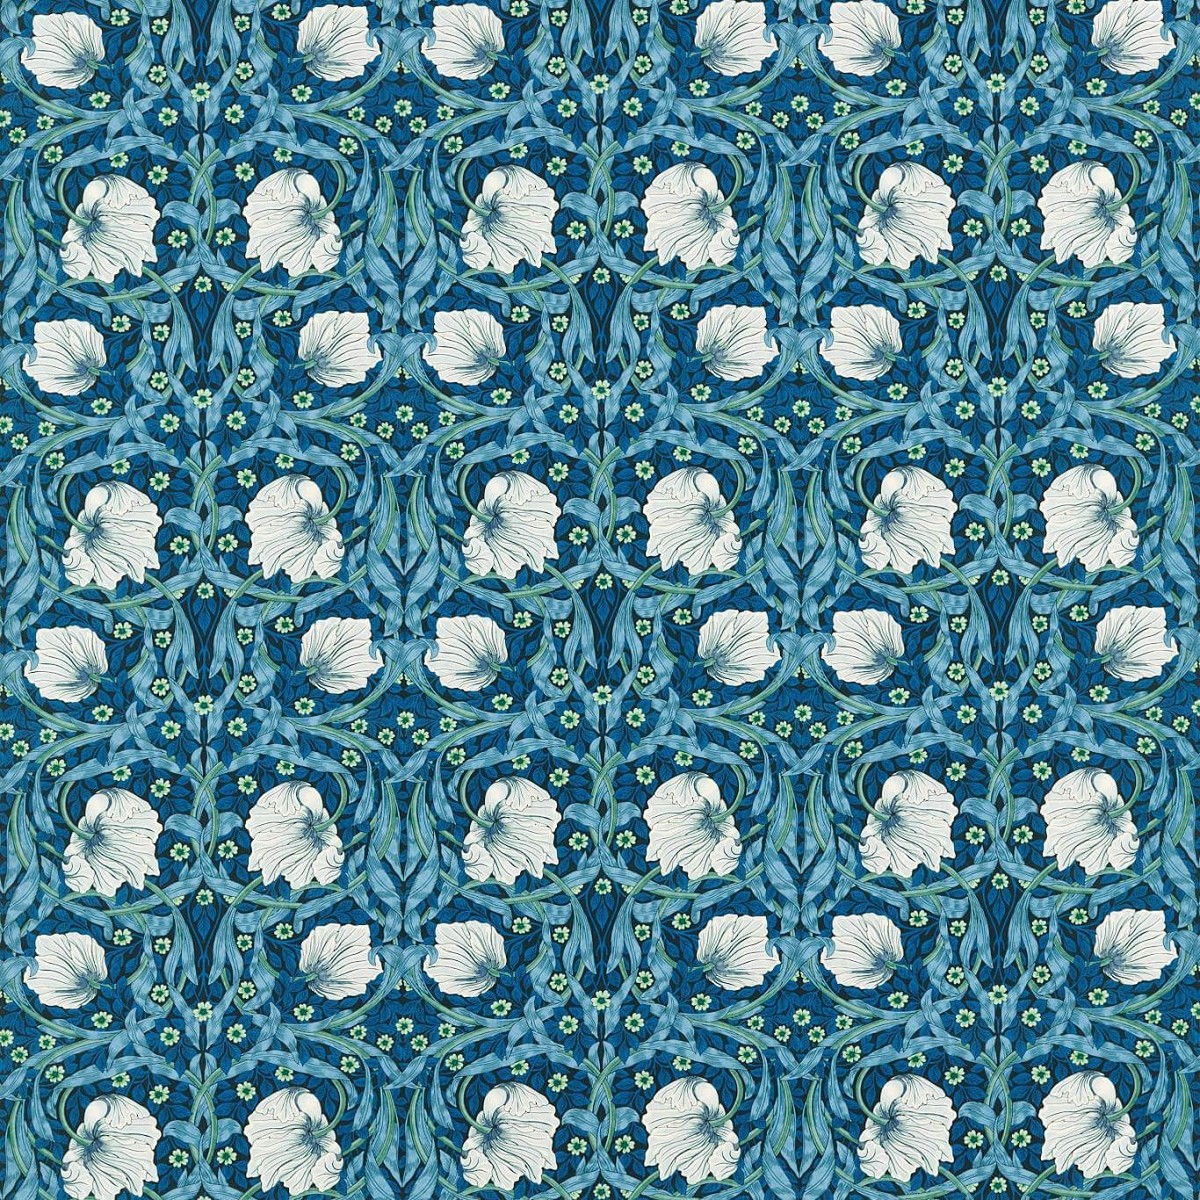 Pimpernel Midnight/Opal Fabric by William Morris & Co.